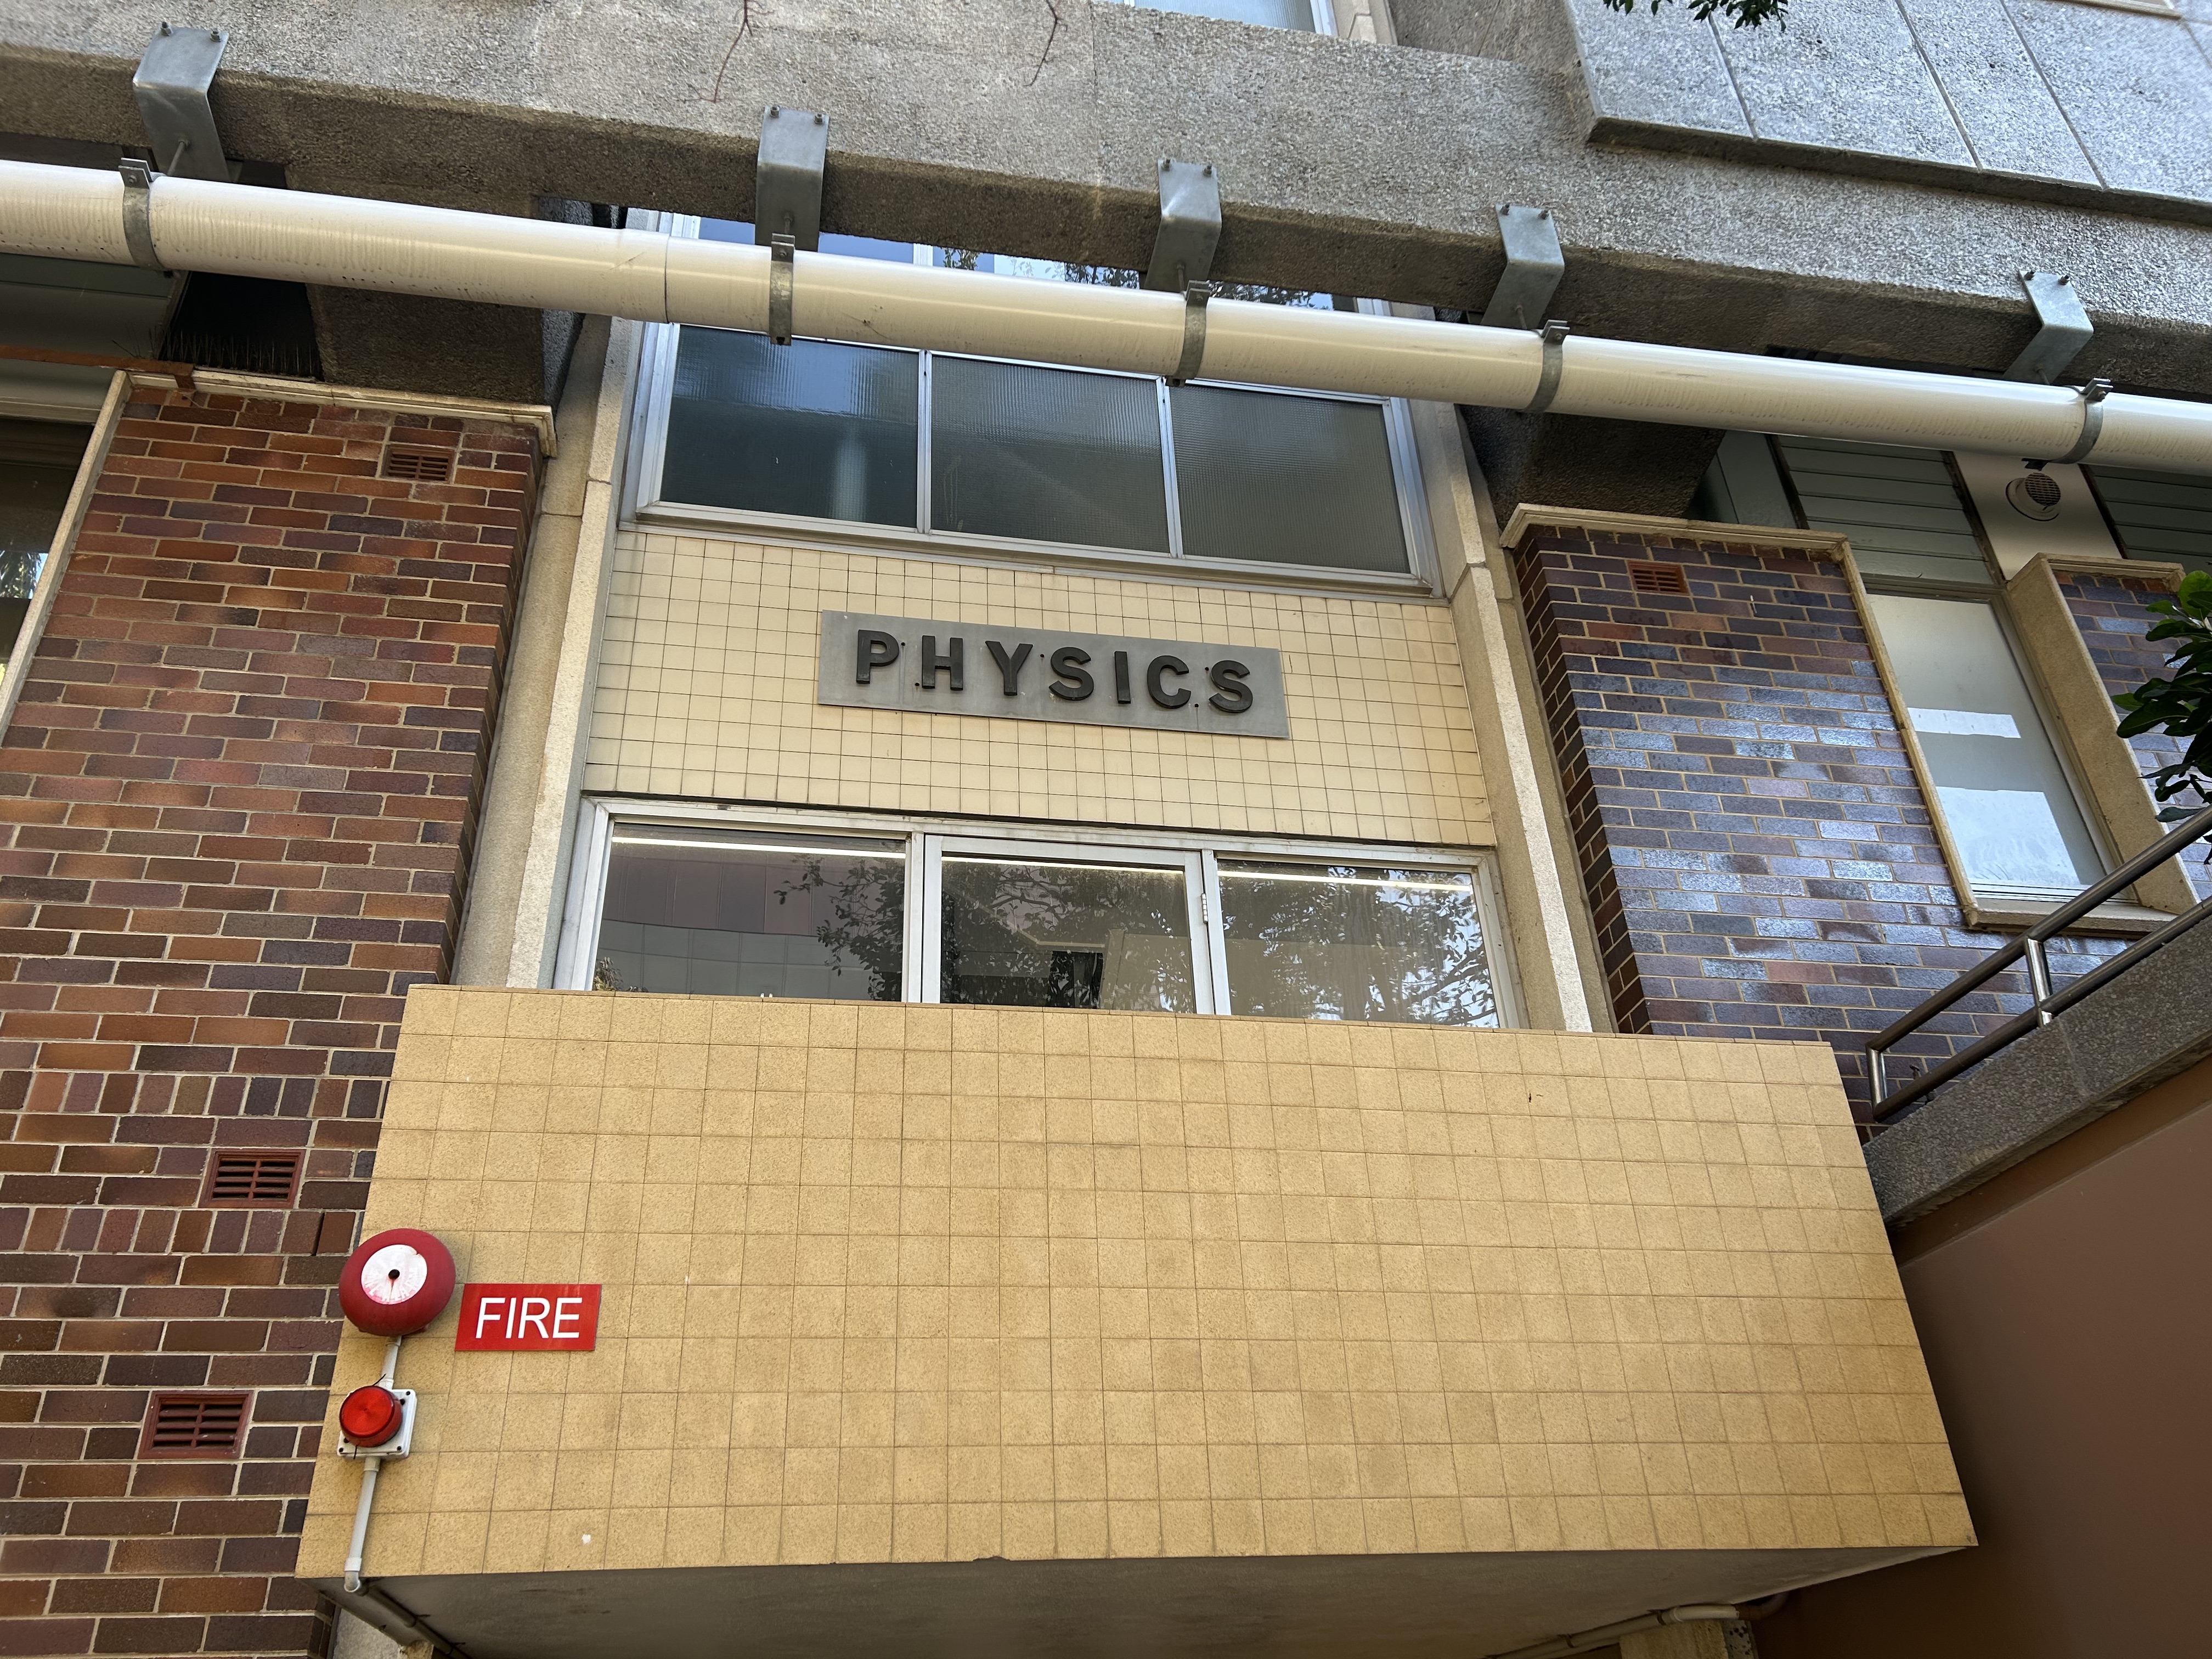 Building with the sign, 'Physics'